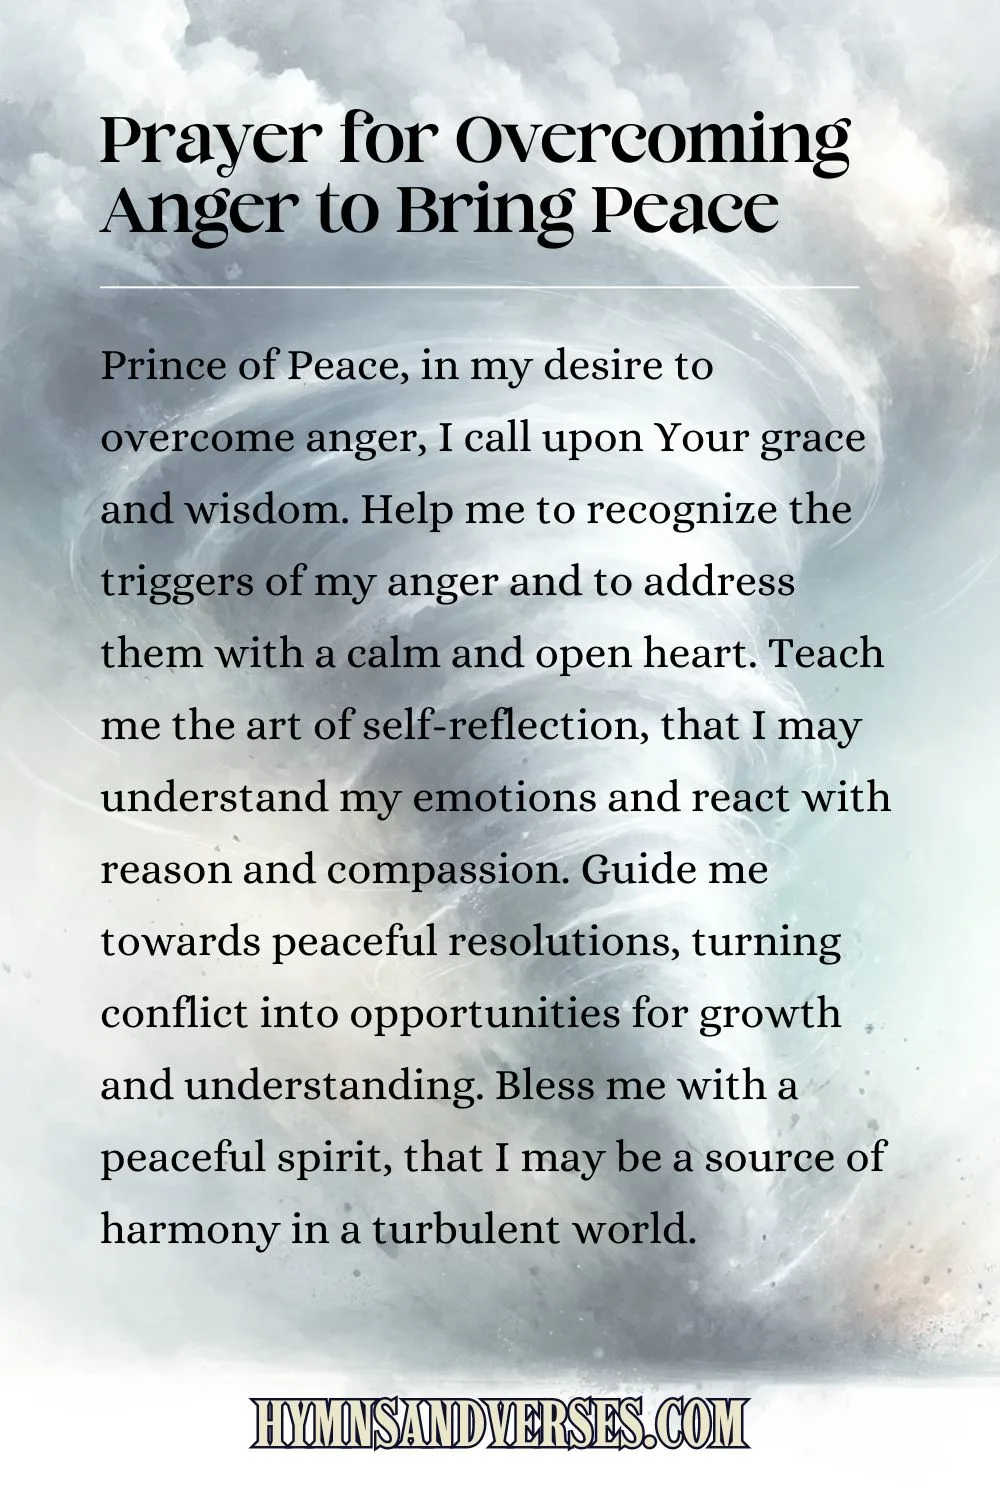 Pin image for prayer, reads: Prince of Peace, in my desire to overcome anger, I call upon Your grace and wisdom. Help me to recognize the triggers of my anger and to address them with a calm and open heart. Teach me the art of self-reflection, that I may understand my emotions and react with reason and compassion. Guide me towards peaceful resolutions, turning conflict into opportunities for growth and understanding. Bless me with a peaceful spirit, that I may be a source of harmony in a turbulent world.